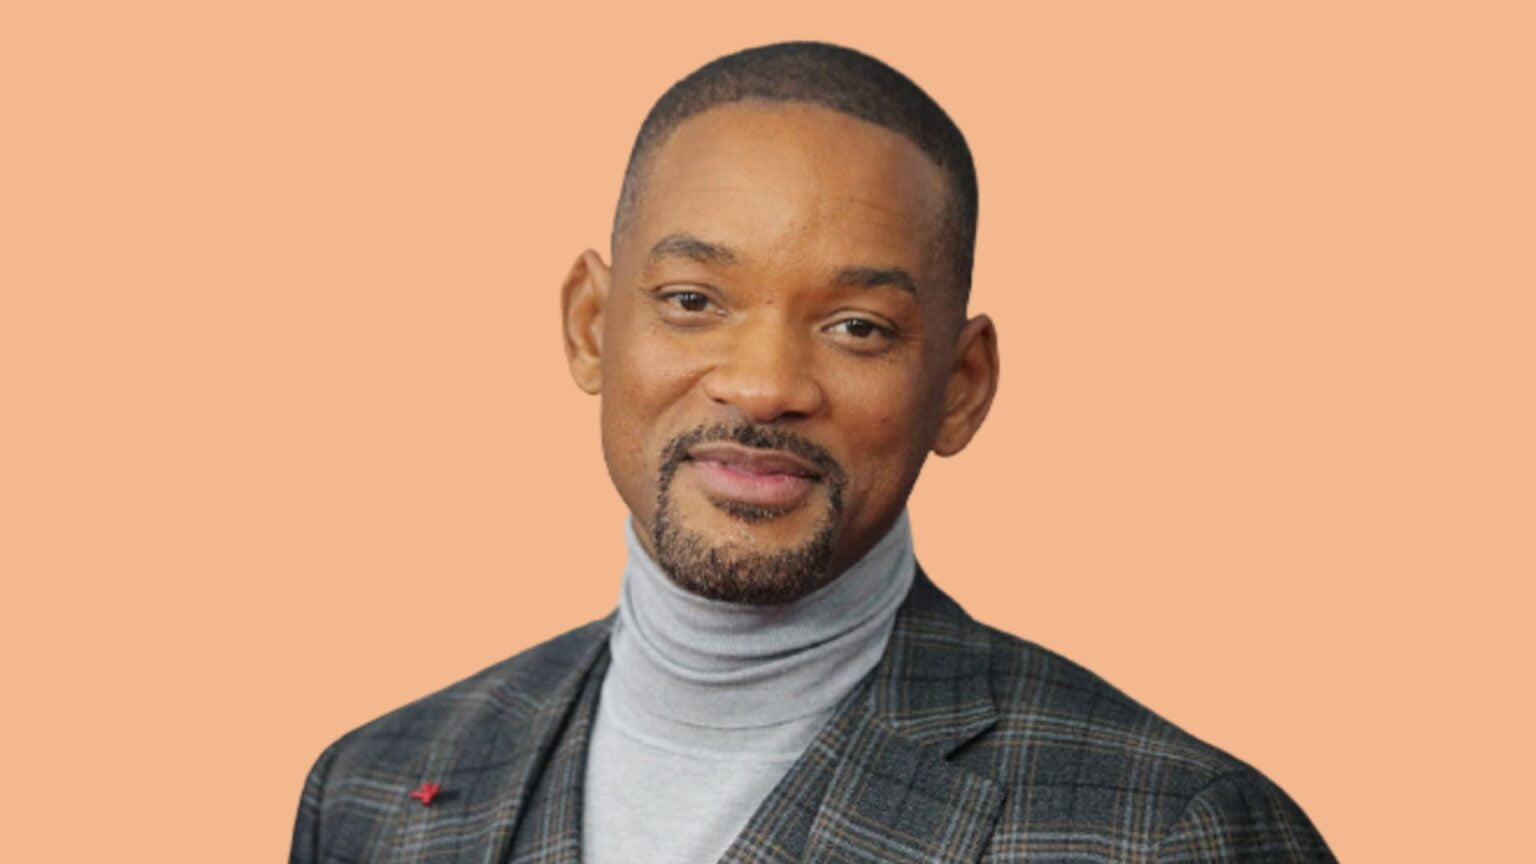 Will Smith Plastic Surgery Before & After Photos Revealed